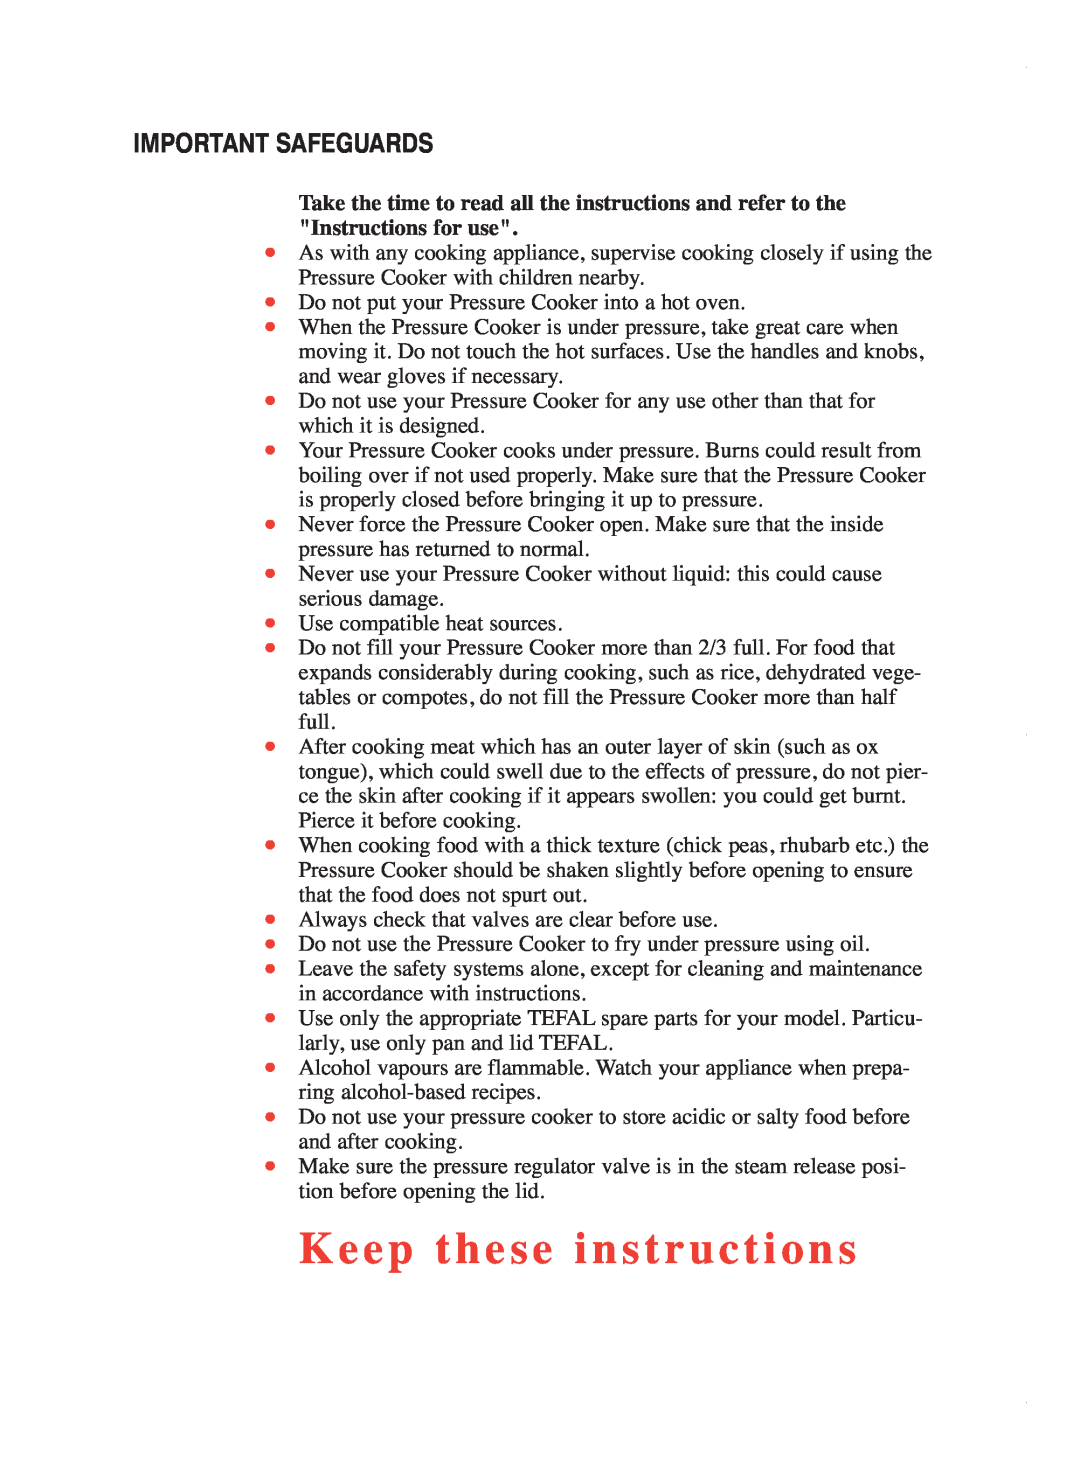 Groupe SEB USA - T-FAL Pressure Cooker user manual Important Safeguards, Keep these instructions 